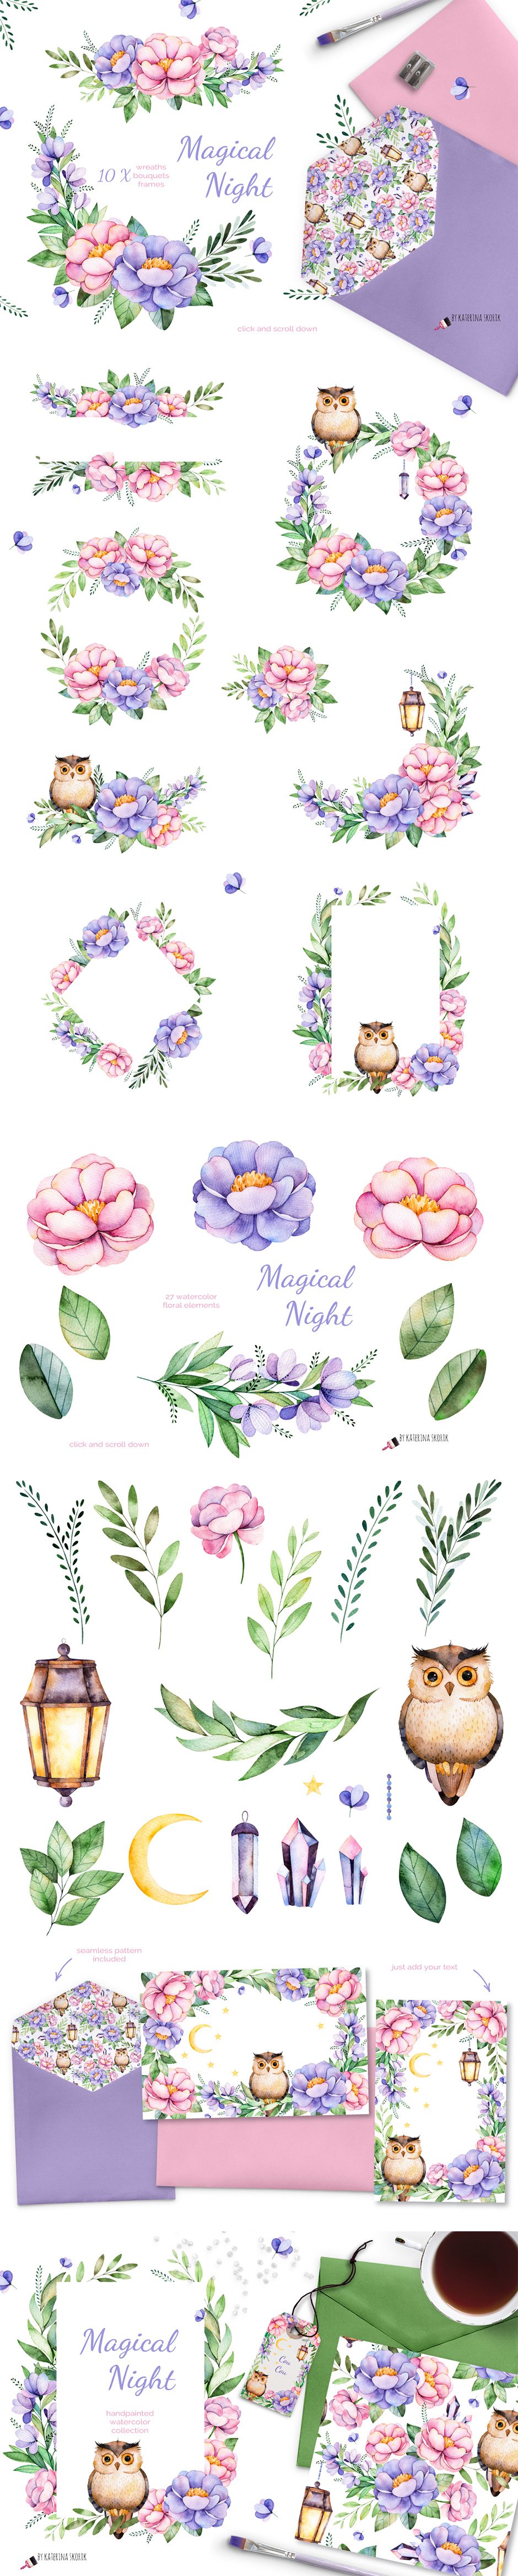 Magical Night Watercolor Collection